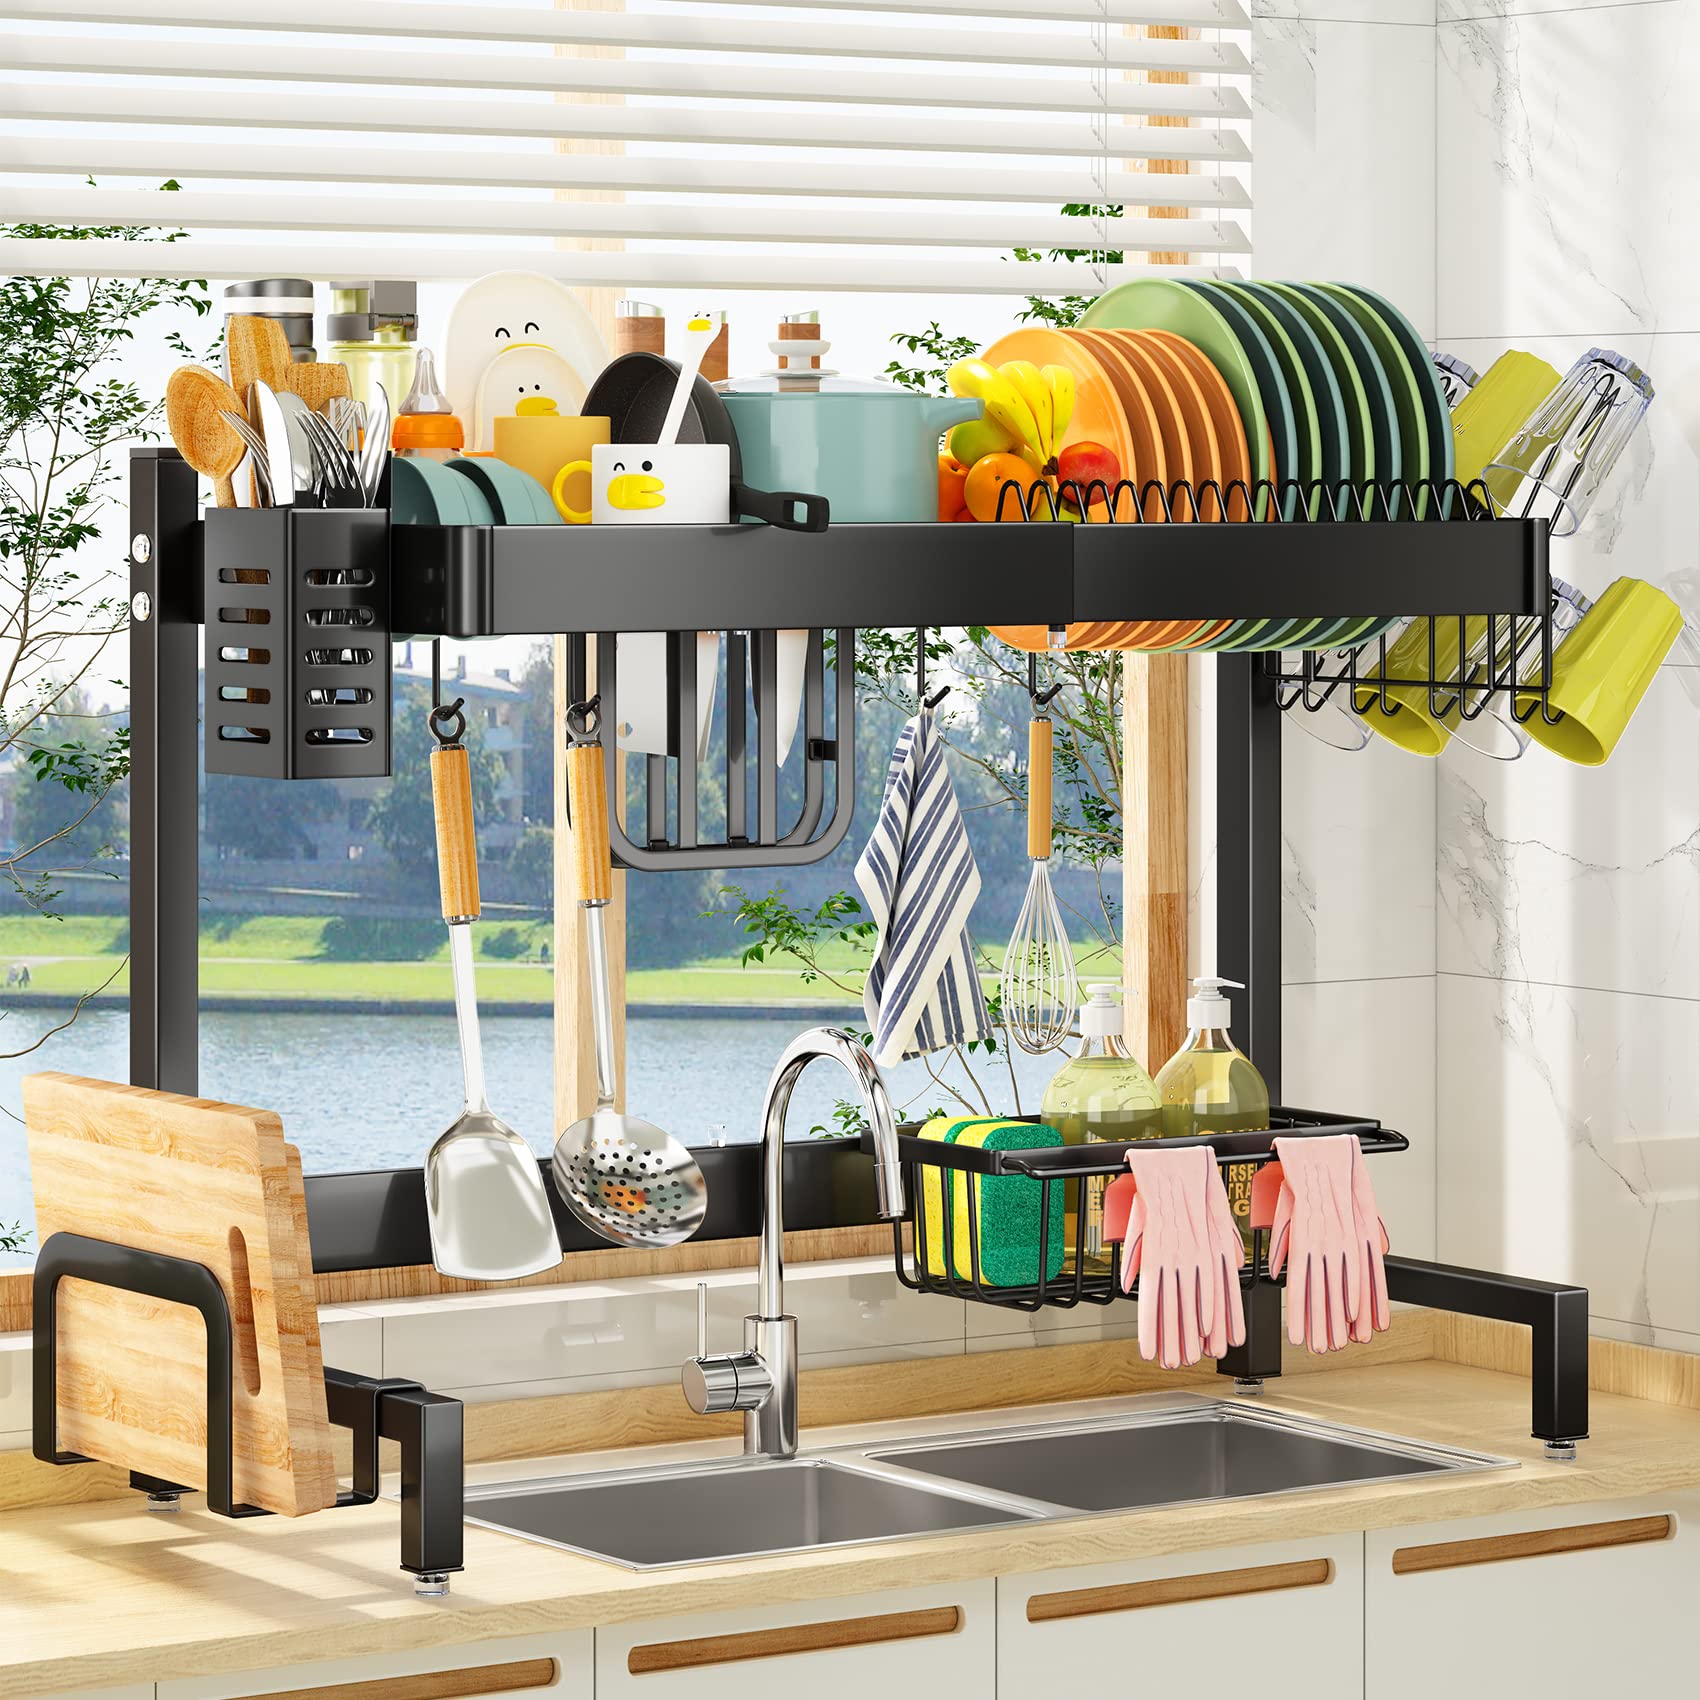 SAYZH Dish Drying Rack, Over The Sink Dish Drying Rack Adjustable ( from 199 to 34 inches), 2 Tier Dish Rack with Utensil cup Holder S